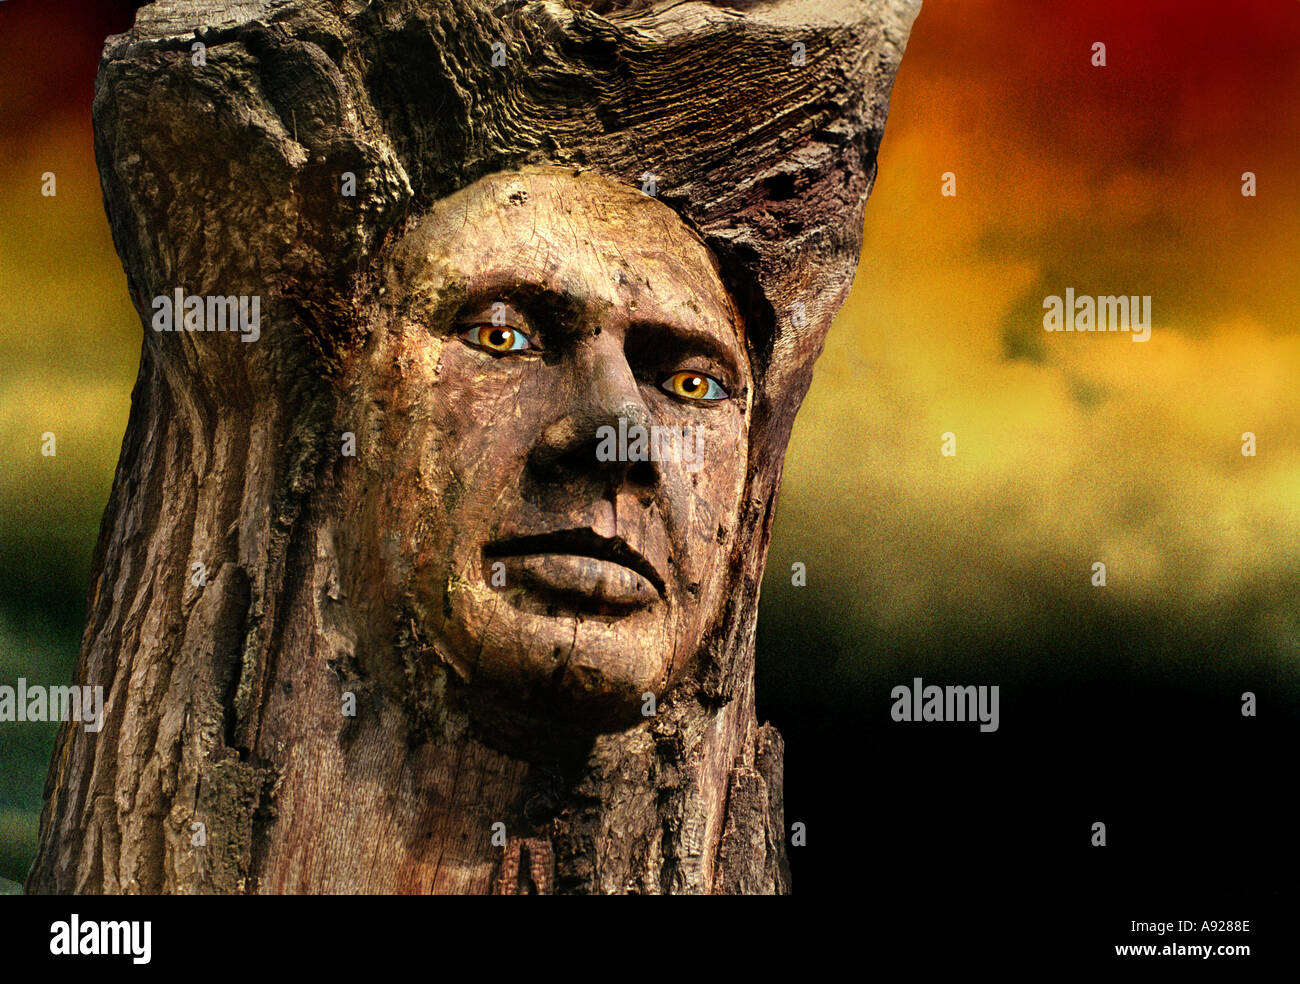 CARVED HUMAN FACE ON TREE STUMP Stock Photo